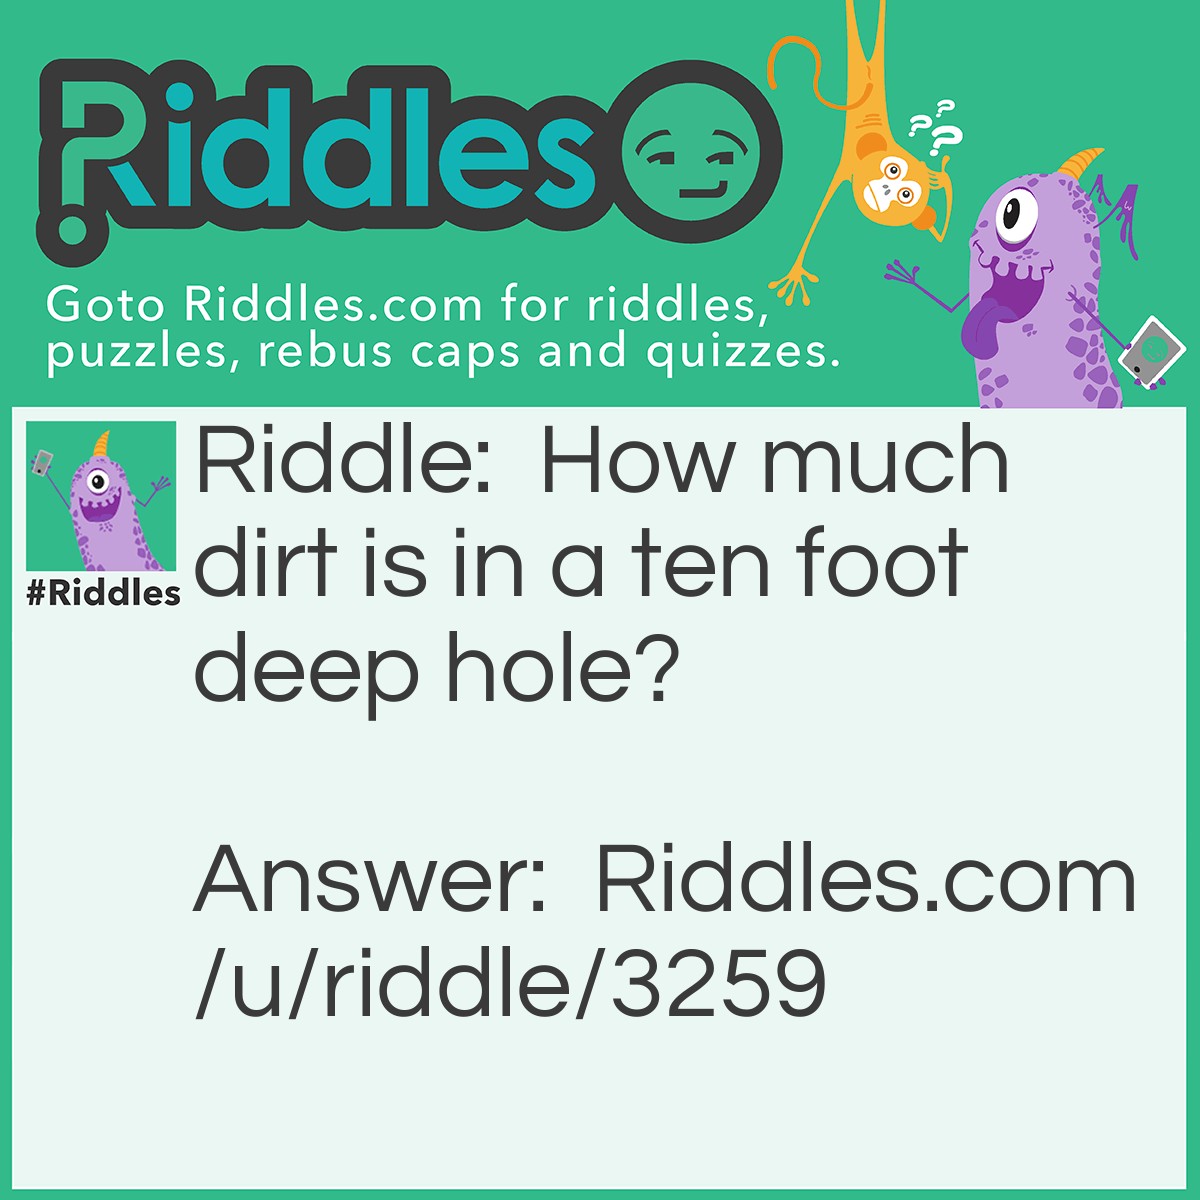 Riddle: How much dirt is in a ten foot deep hole? Answer: None, if there was dirt in a hole, it won't be a hole.